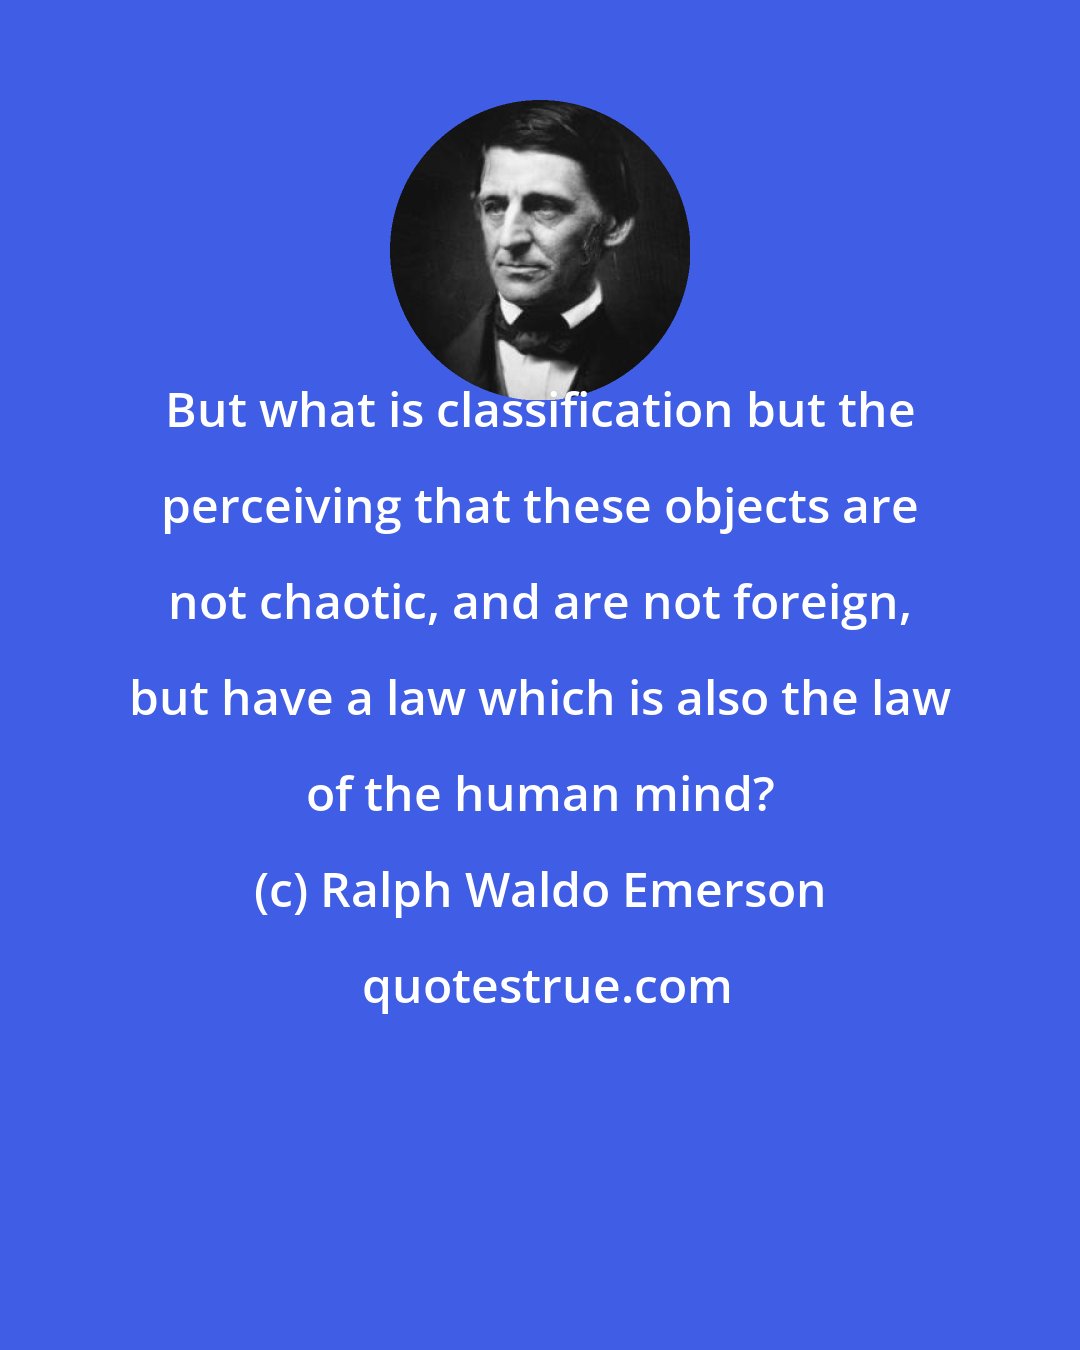 Ralph Waldo Emerson: But what is classification but the perceiving that these objects are not chaotic, and are not foreign, but have a law which is also the law of the human mind?